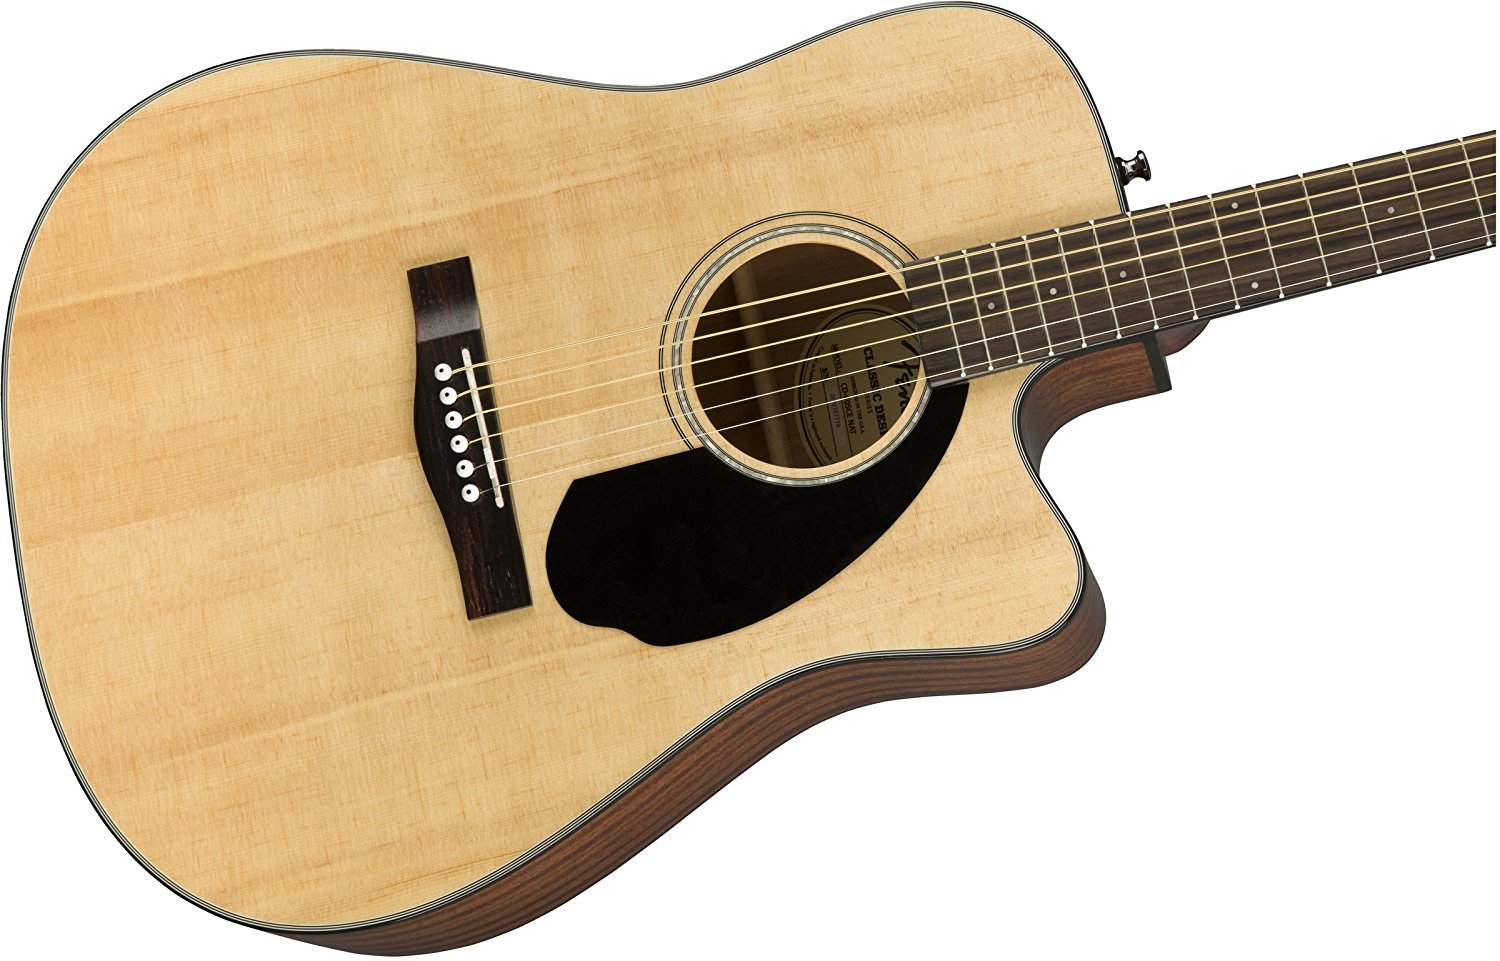 FENDER CD-60SCE ACOUSTIC GUITAR WITH EQ/PICKUP, NATURAL (CD 60SCE / CD60SCE), FENDER, ACOUSTIC GUITAR, fender-cd-60sce-acoustic-guitar-with-eq-pickup-natural-cd-60sce-cd60sce, ZOSO MUSIC SDN BHD